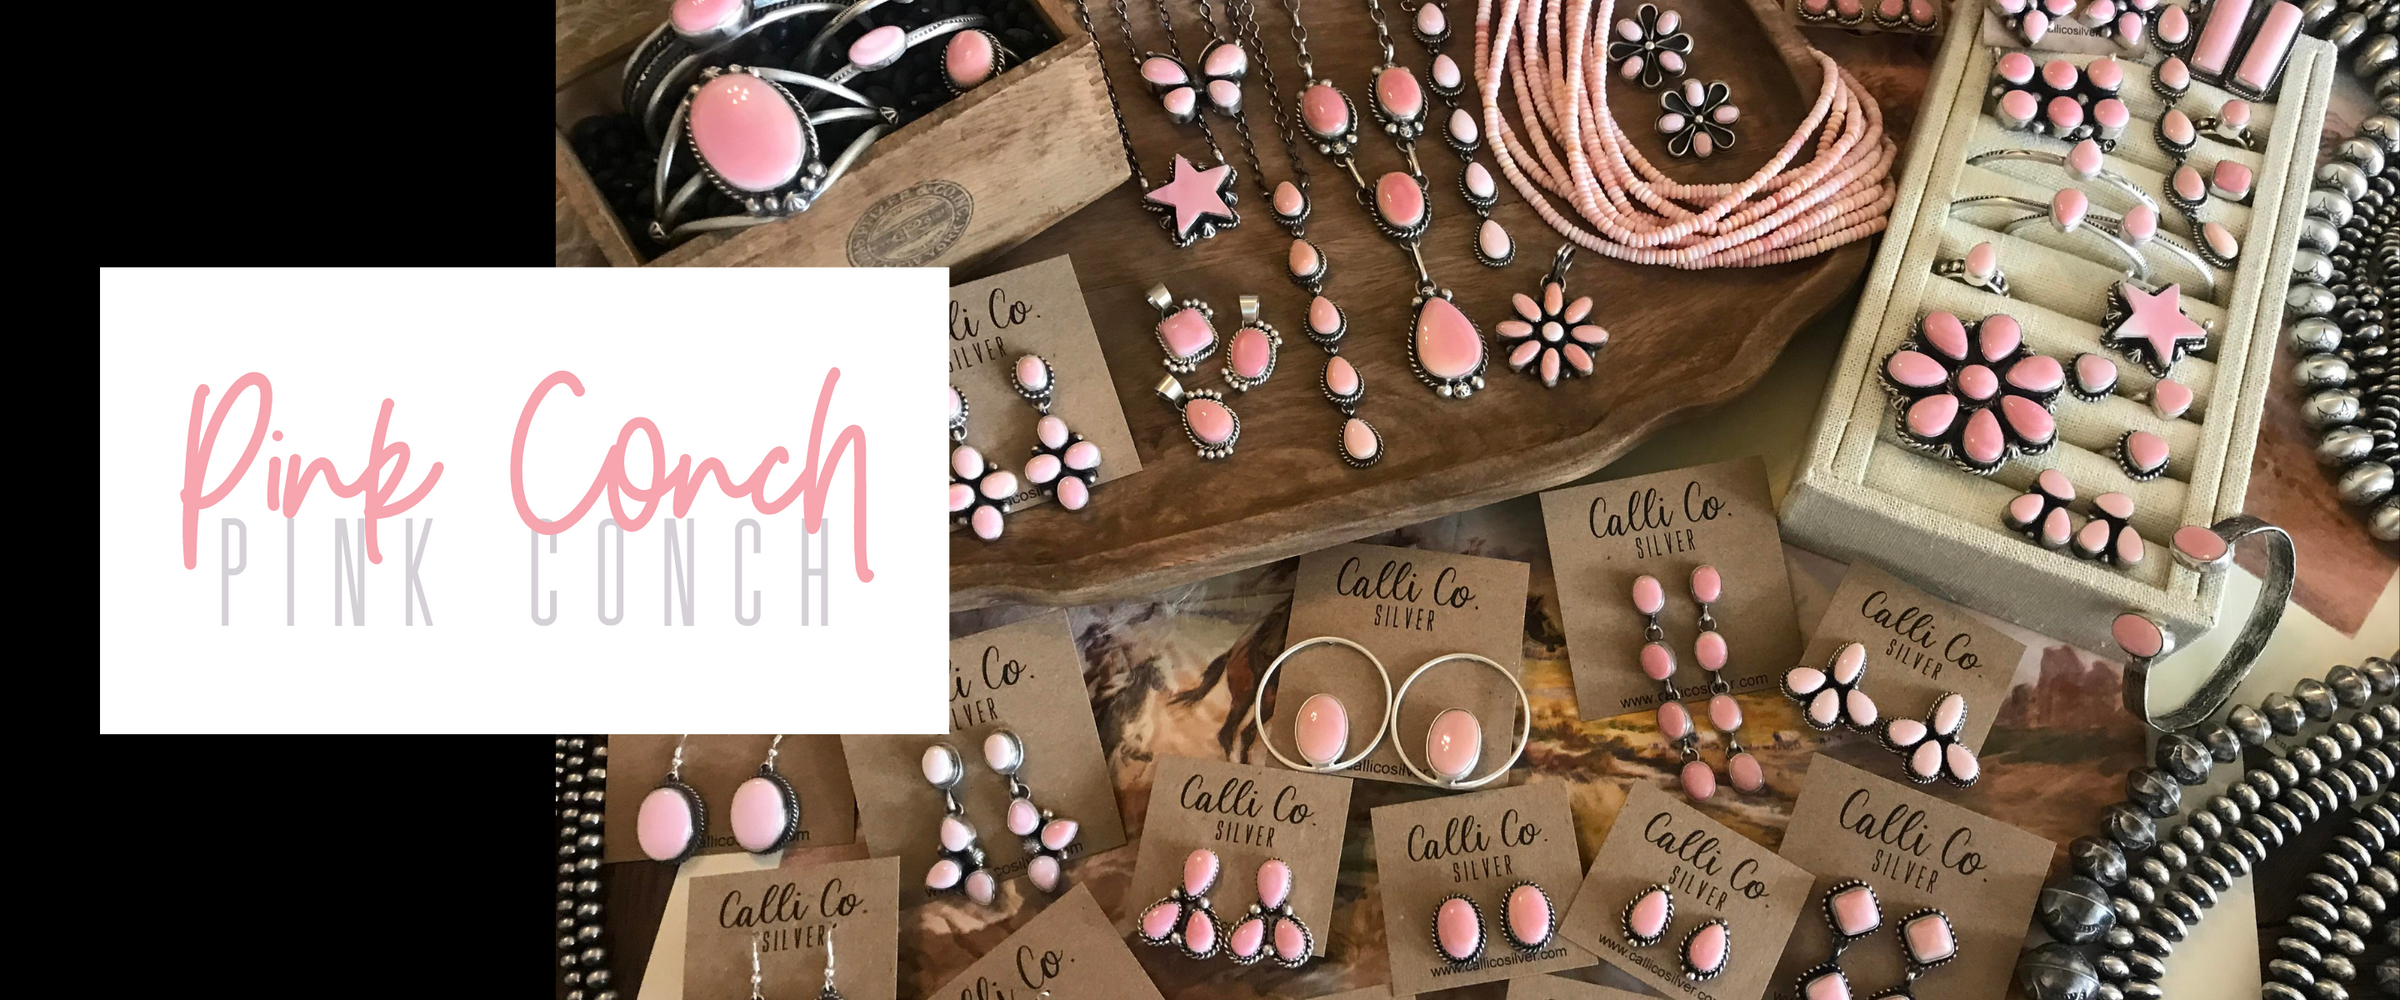 SHOP THE PINK CONCH COLLECTION  | Calli Co. Silver | Handmade Sterling Silver and Turquoise Jewelry | Located in Fort Worth, TX